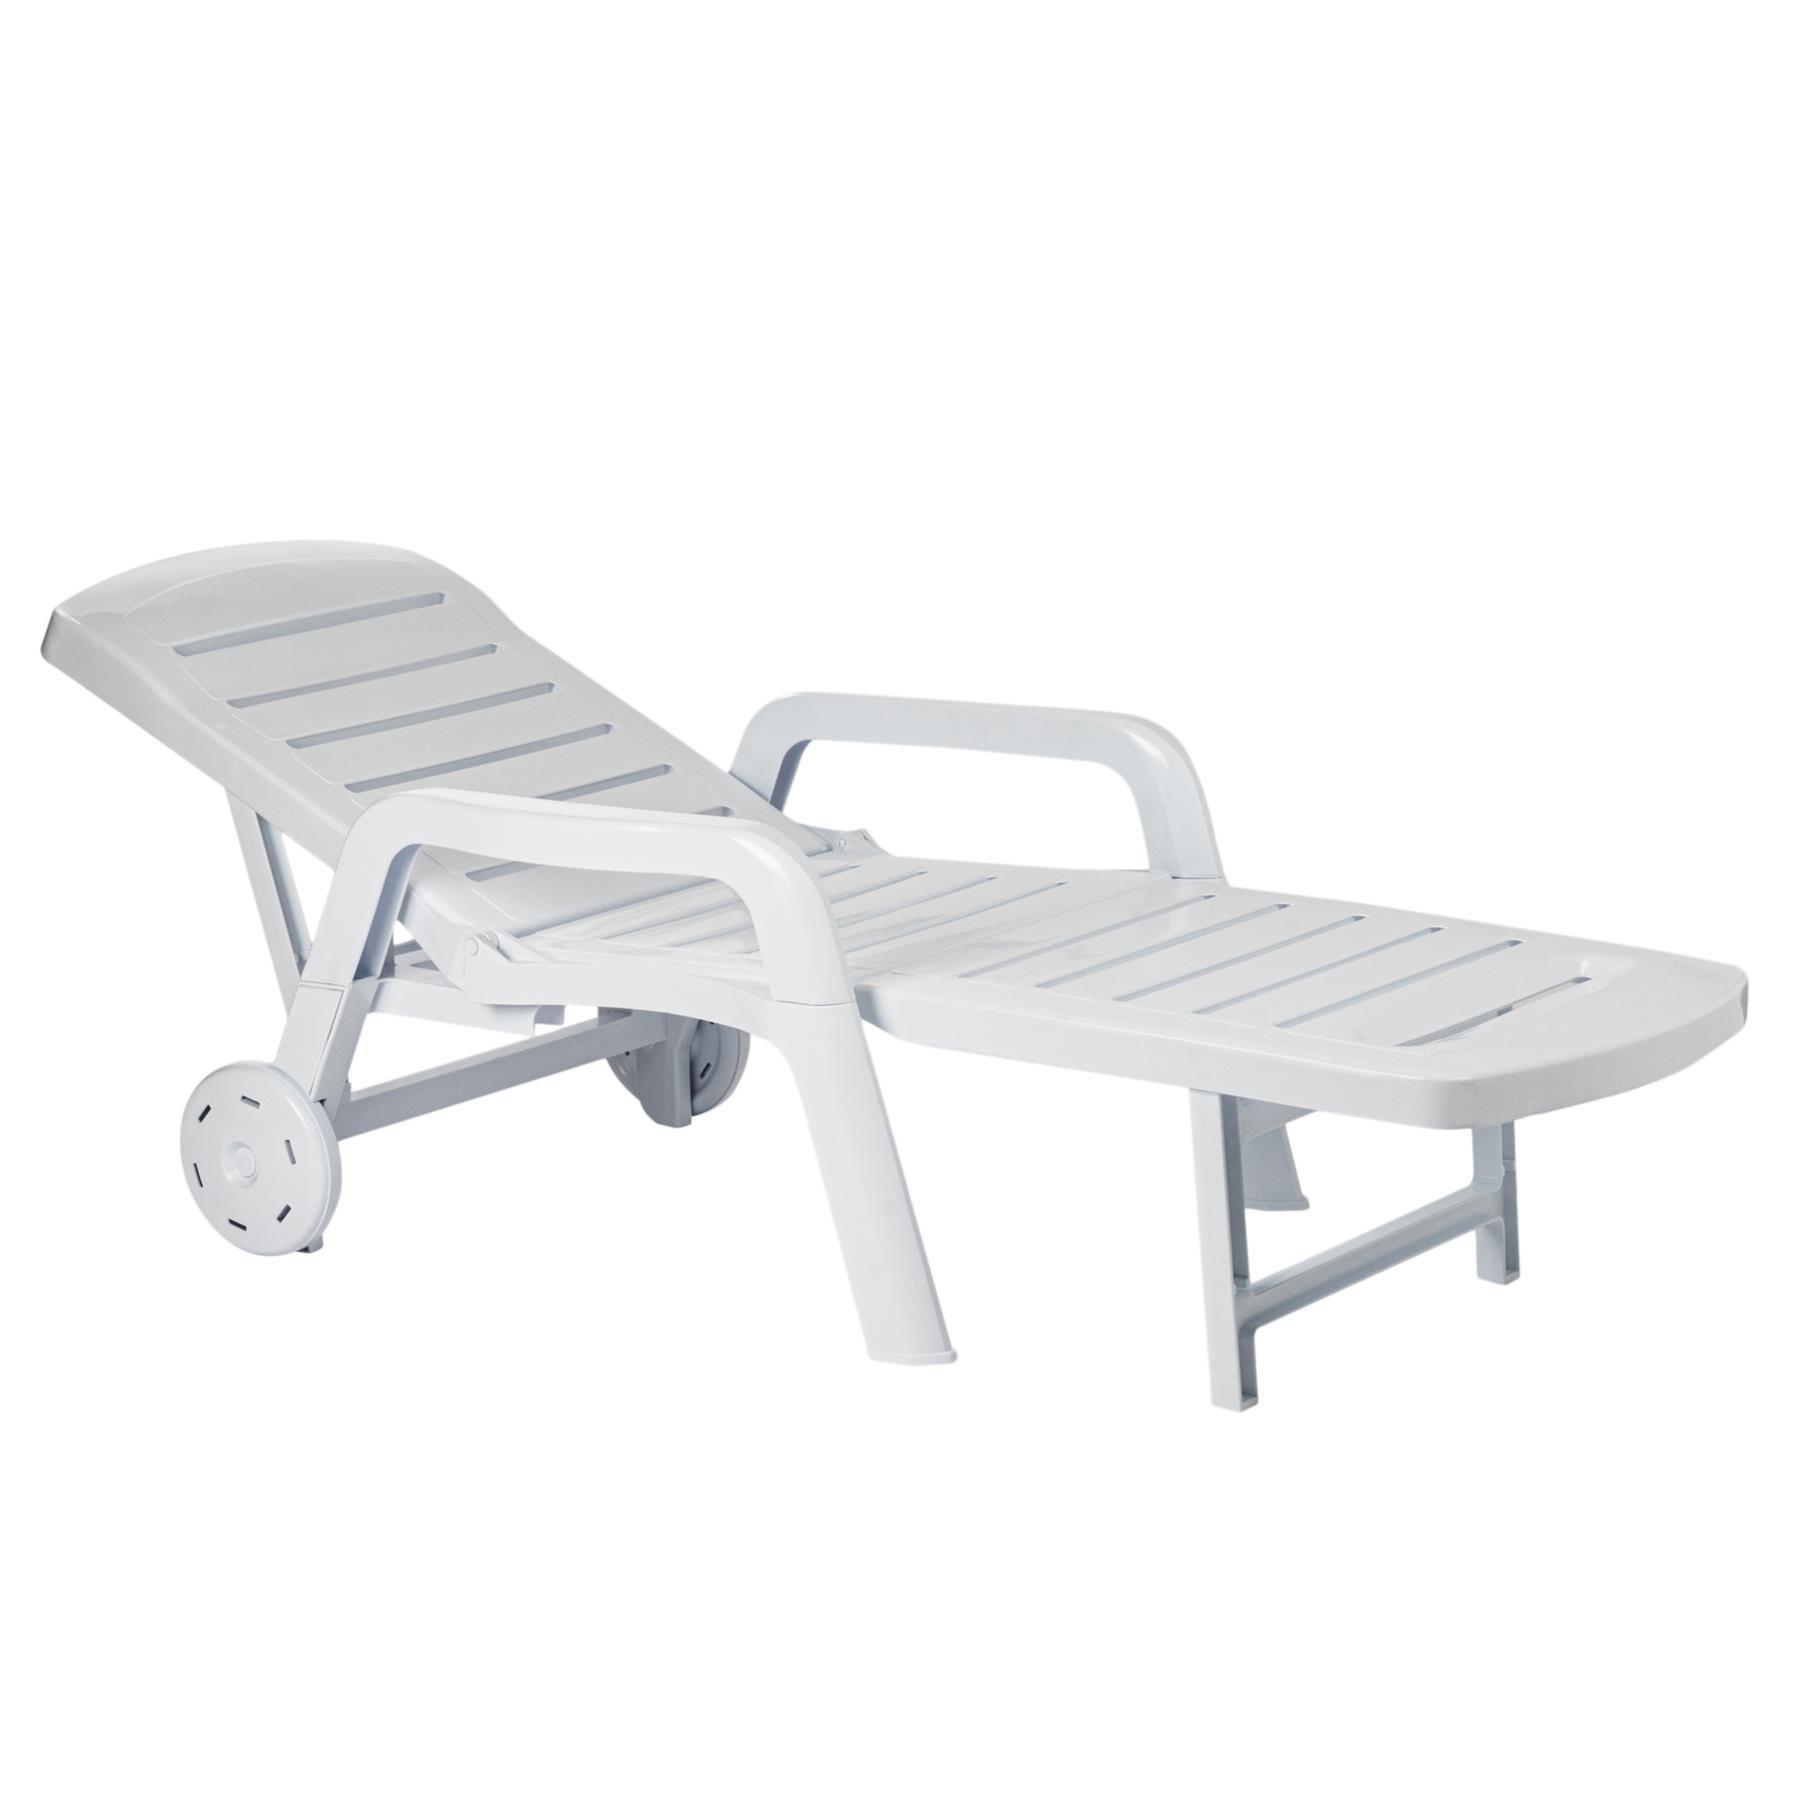 Palamos 3 Position Sun Loungers White Pack of 2